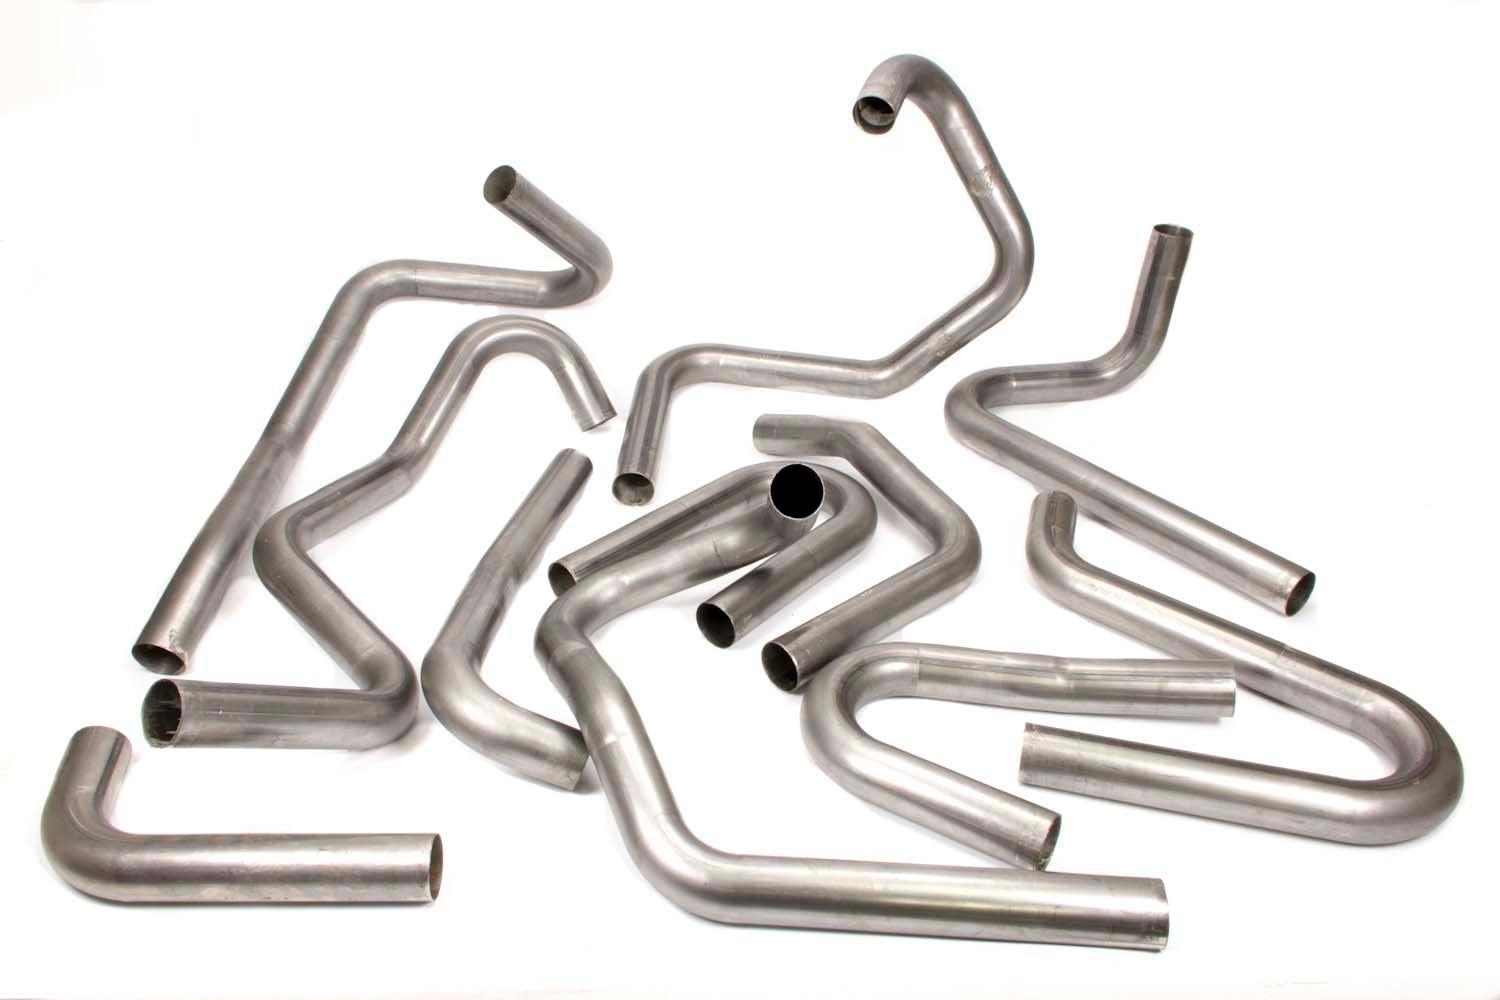 Box of Bends 2.000in - Burlile Performance Products